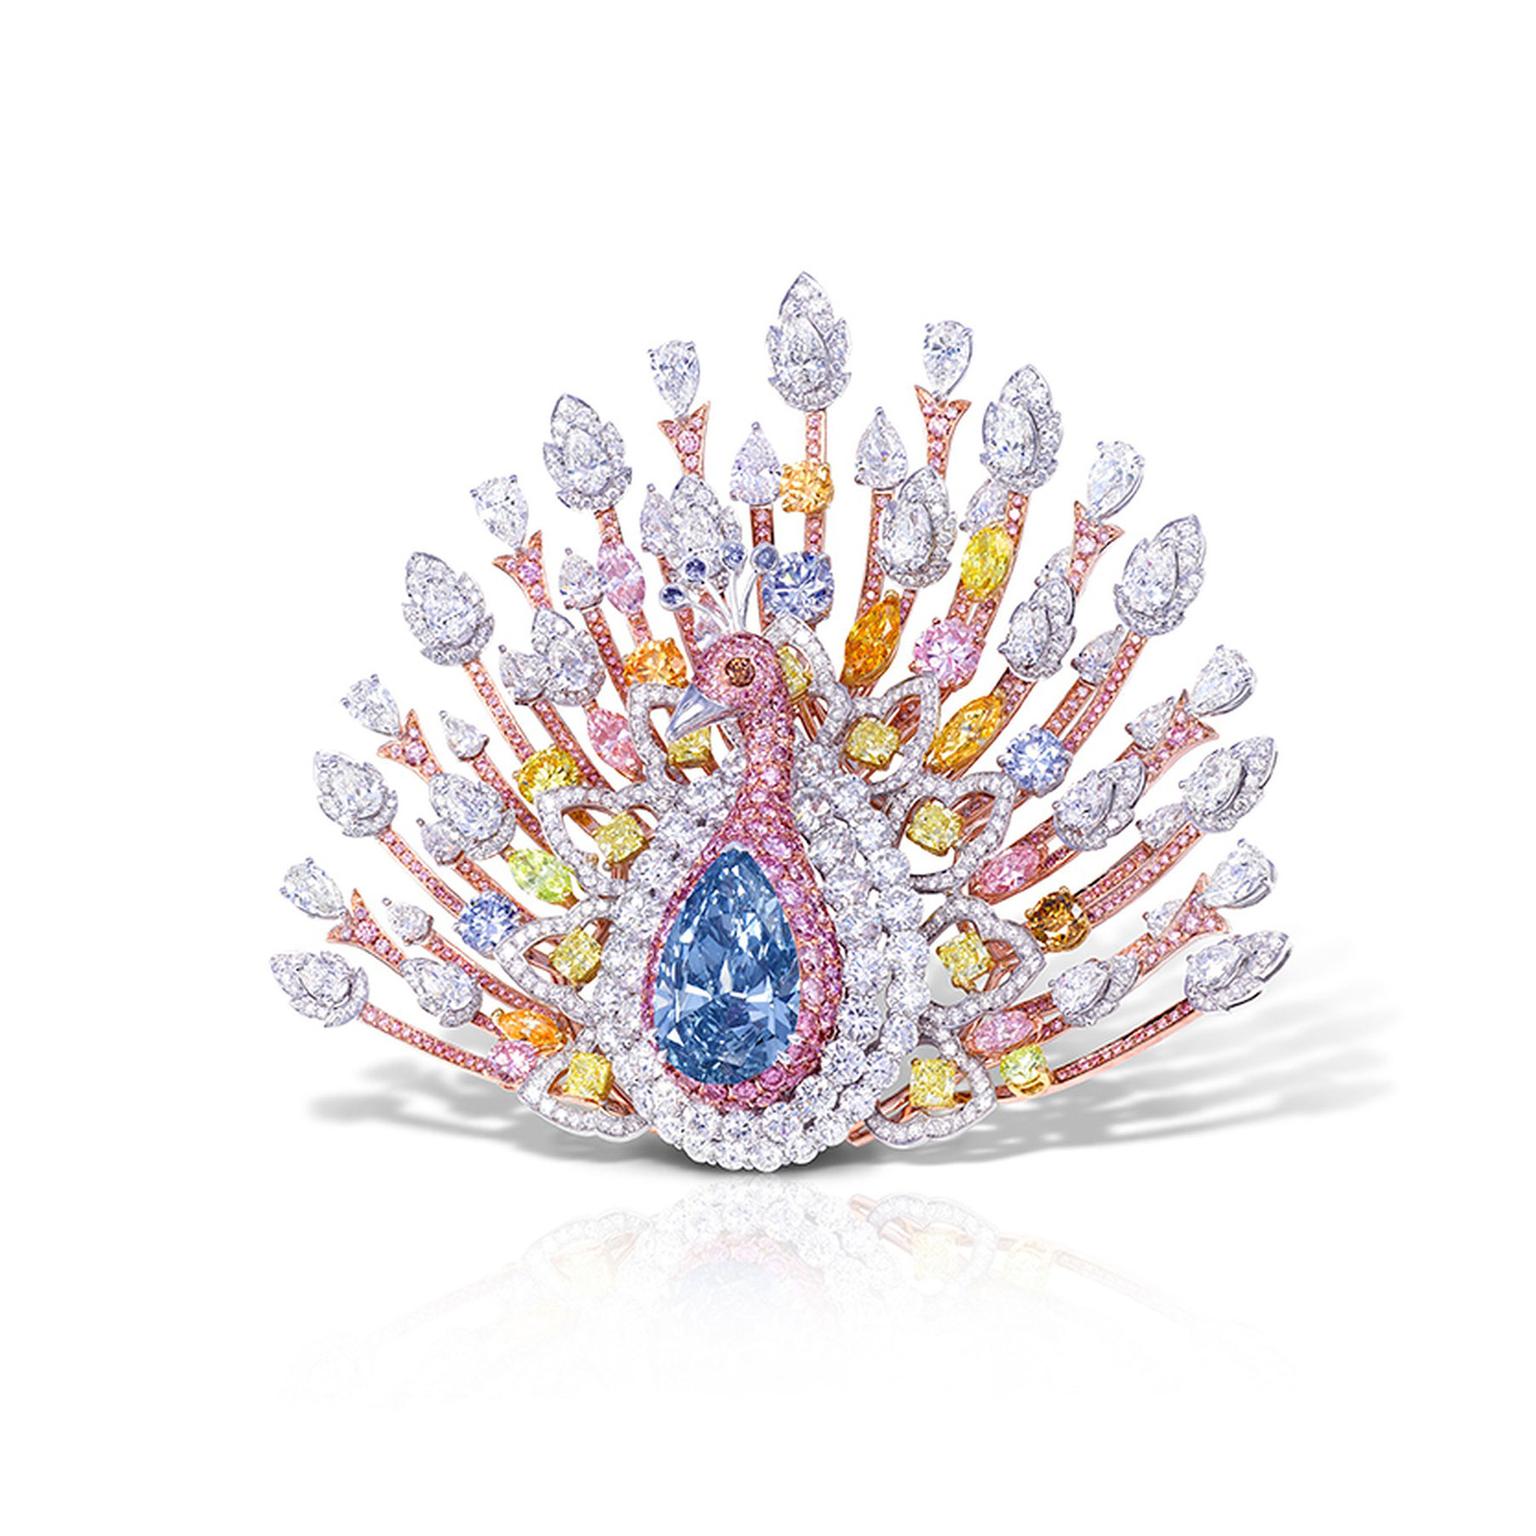 This summer exceptional Diamonds pieces on display at the Rare Jewels Exhibition | The Jewellery Editor